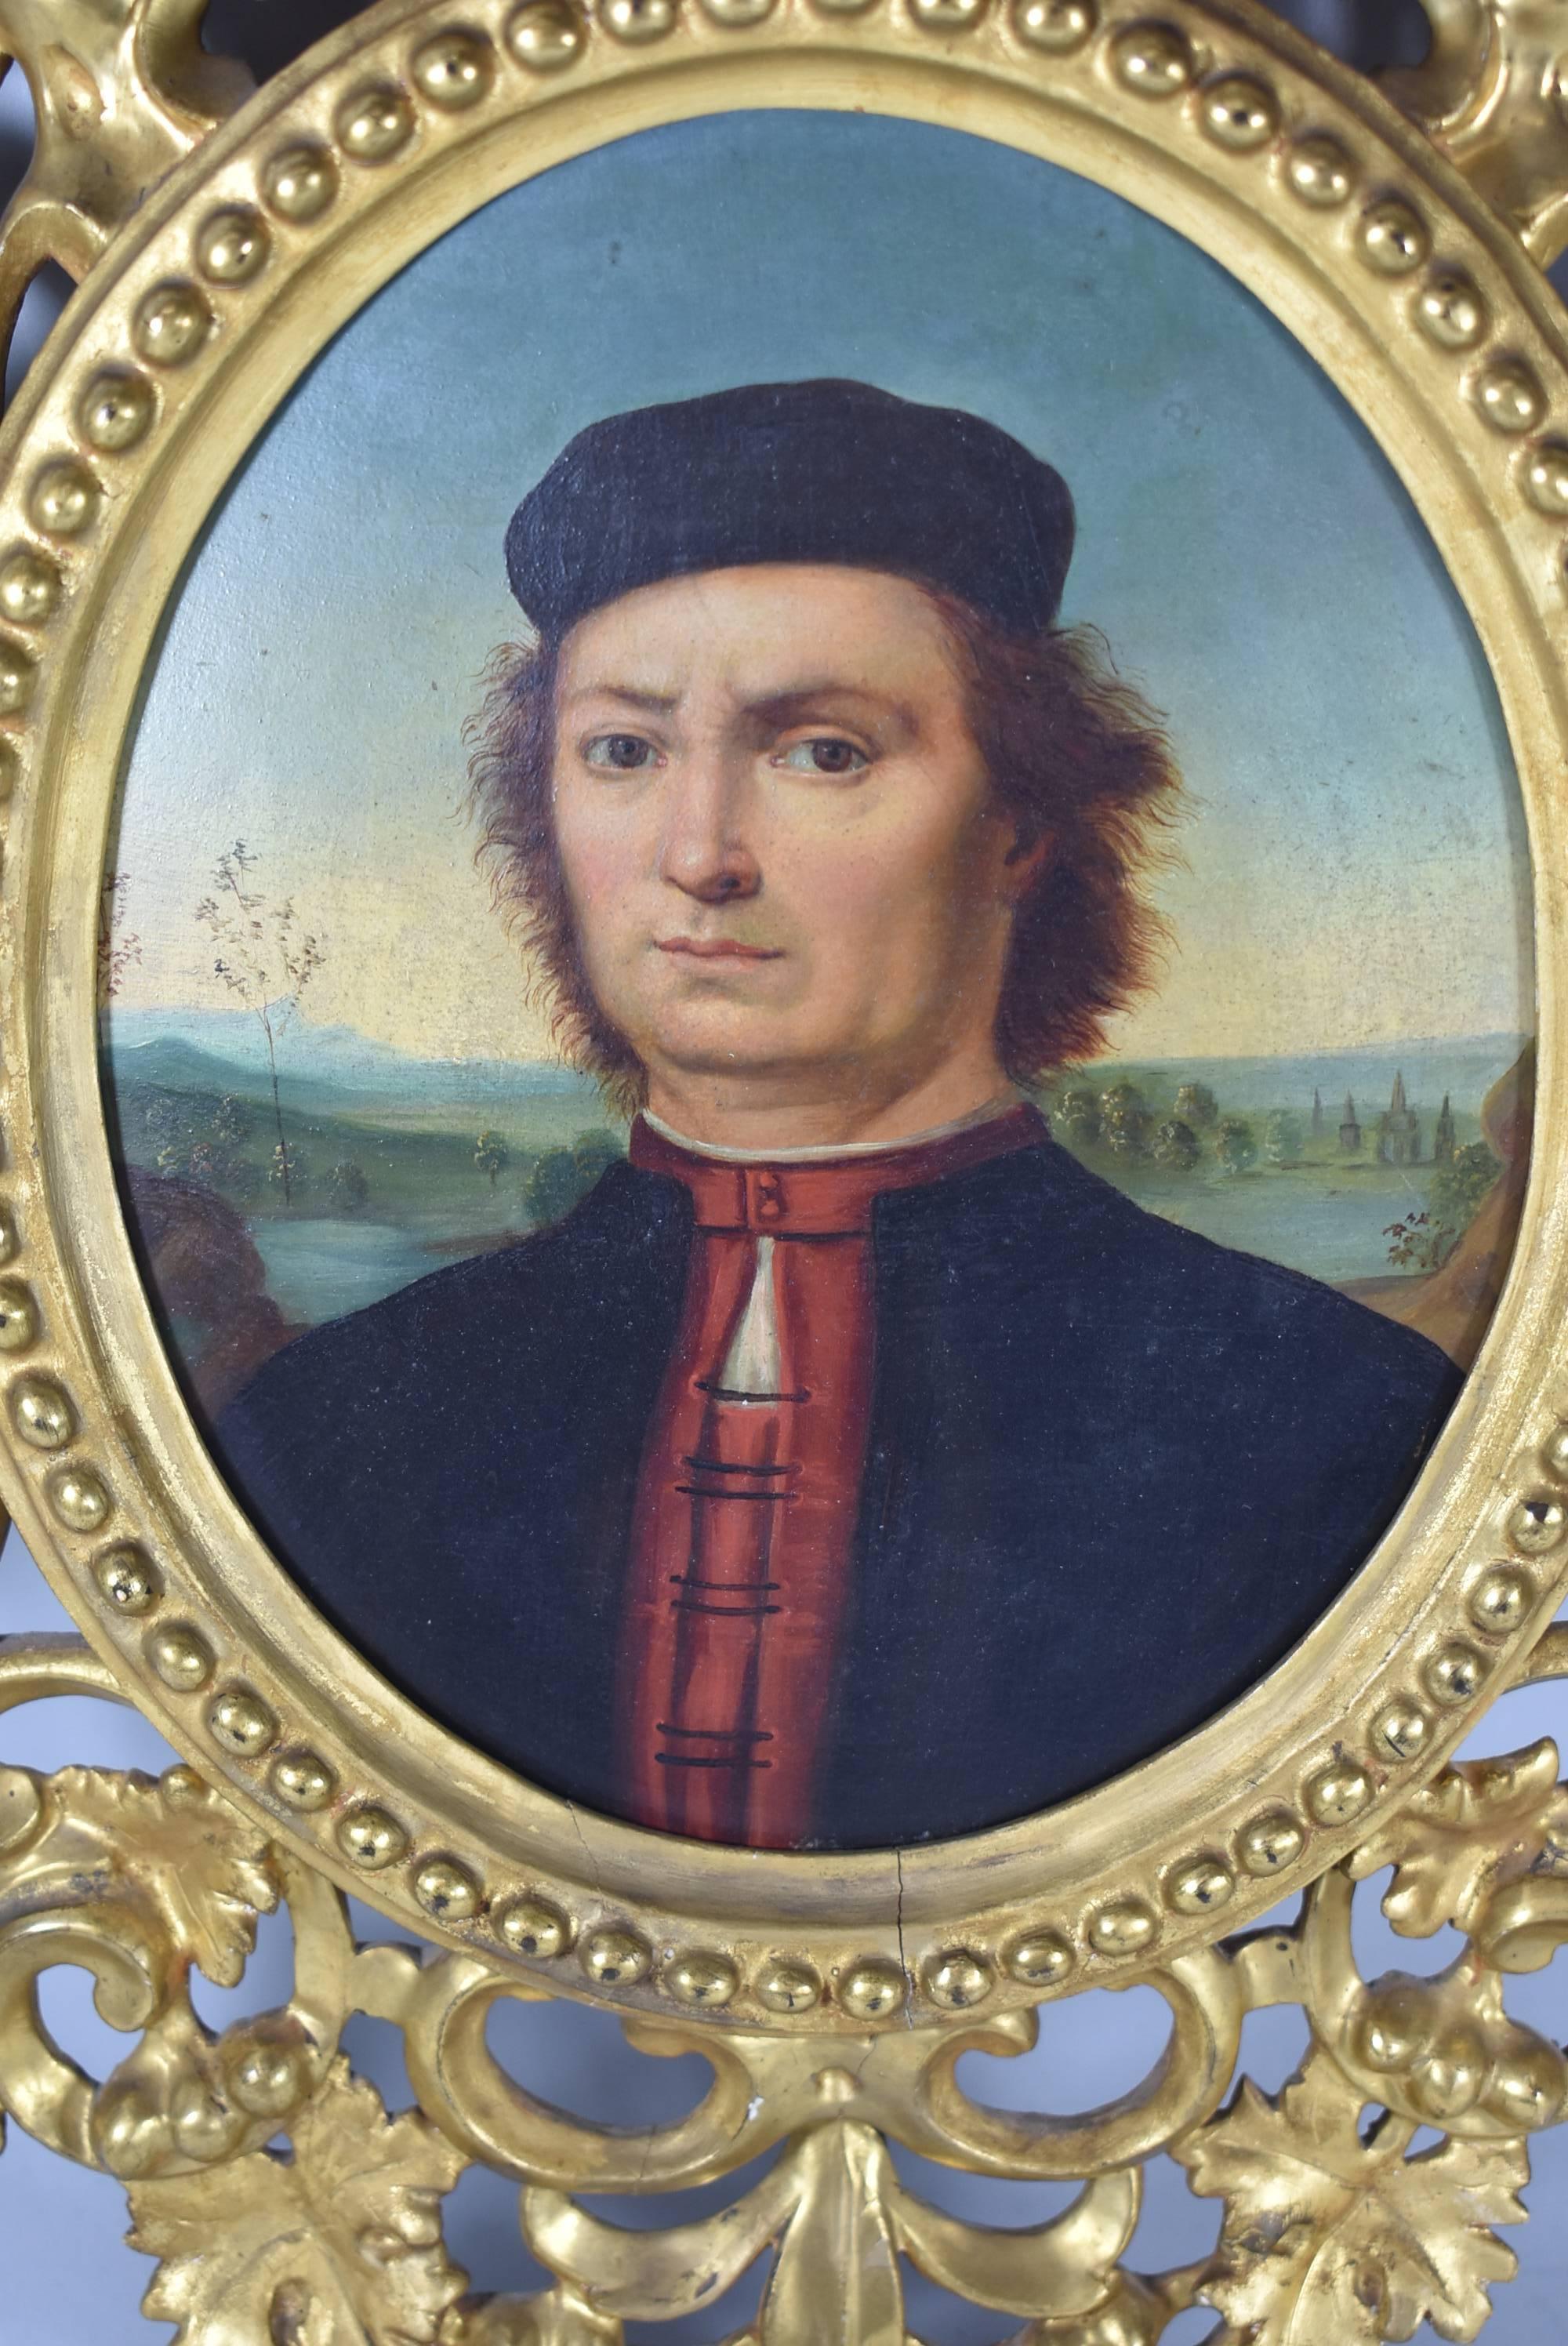 The Portrait of Francesco delle Opere is an oil painting by the Italian Renaissance artist Perugino, 1890. Oil on wood with a gold leaf frame. The dimensions of the frame are 17.5